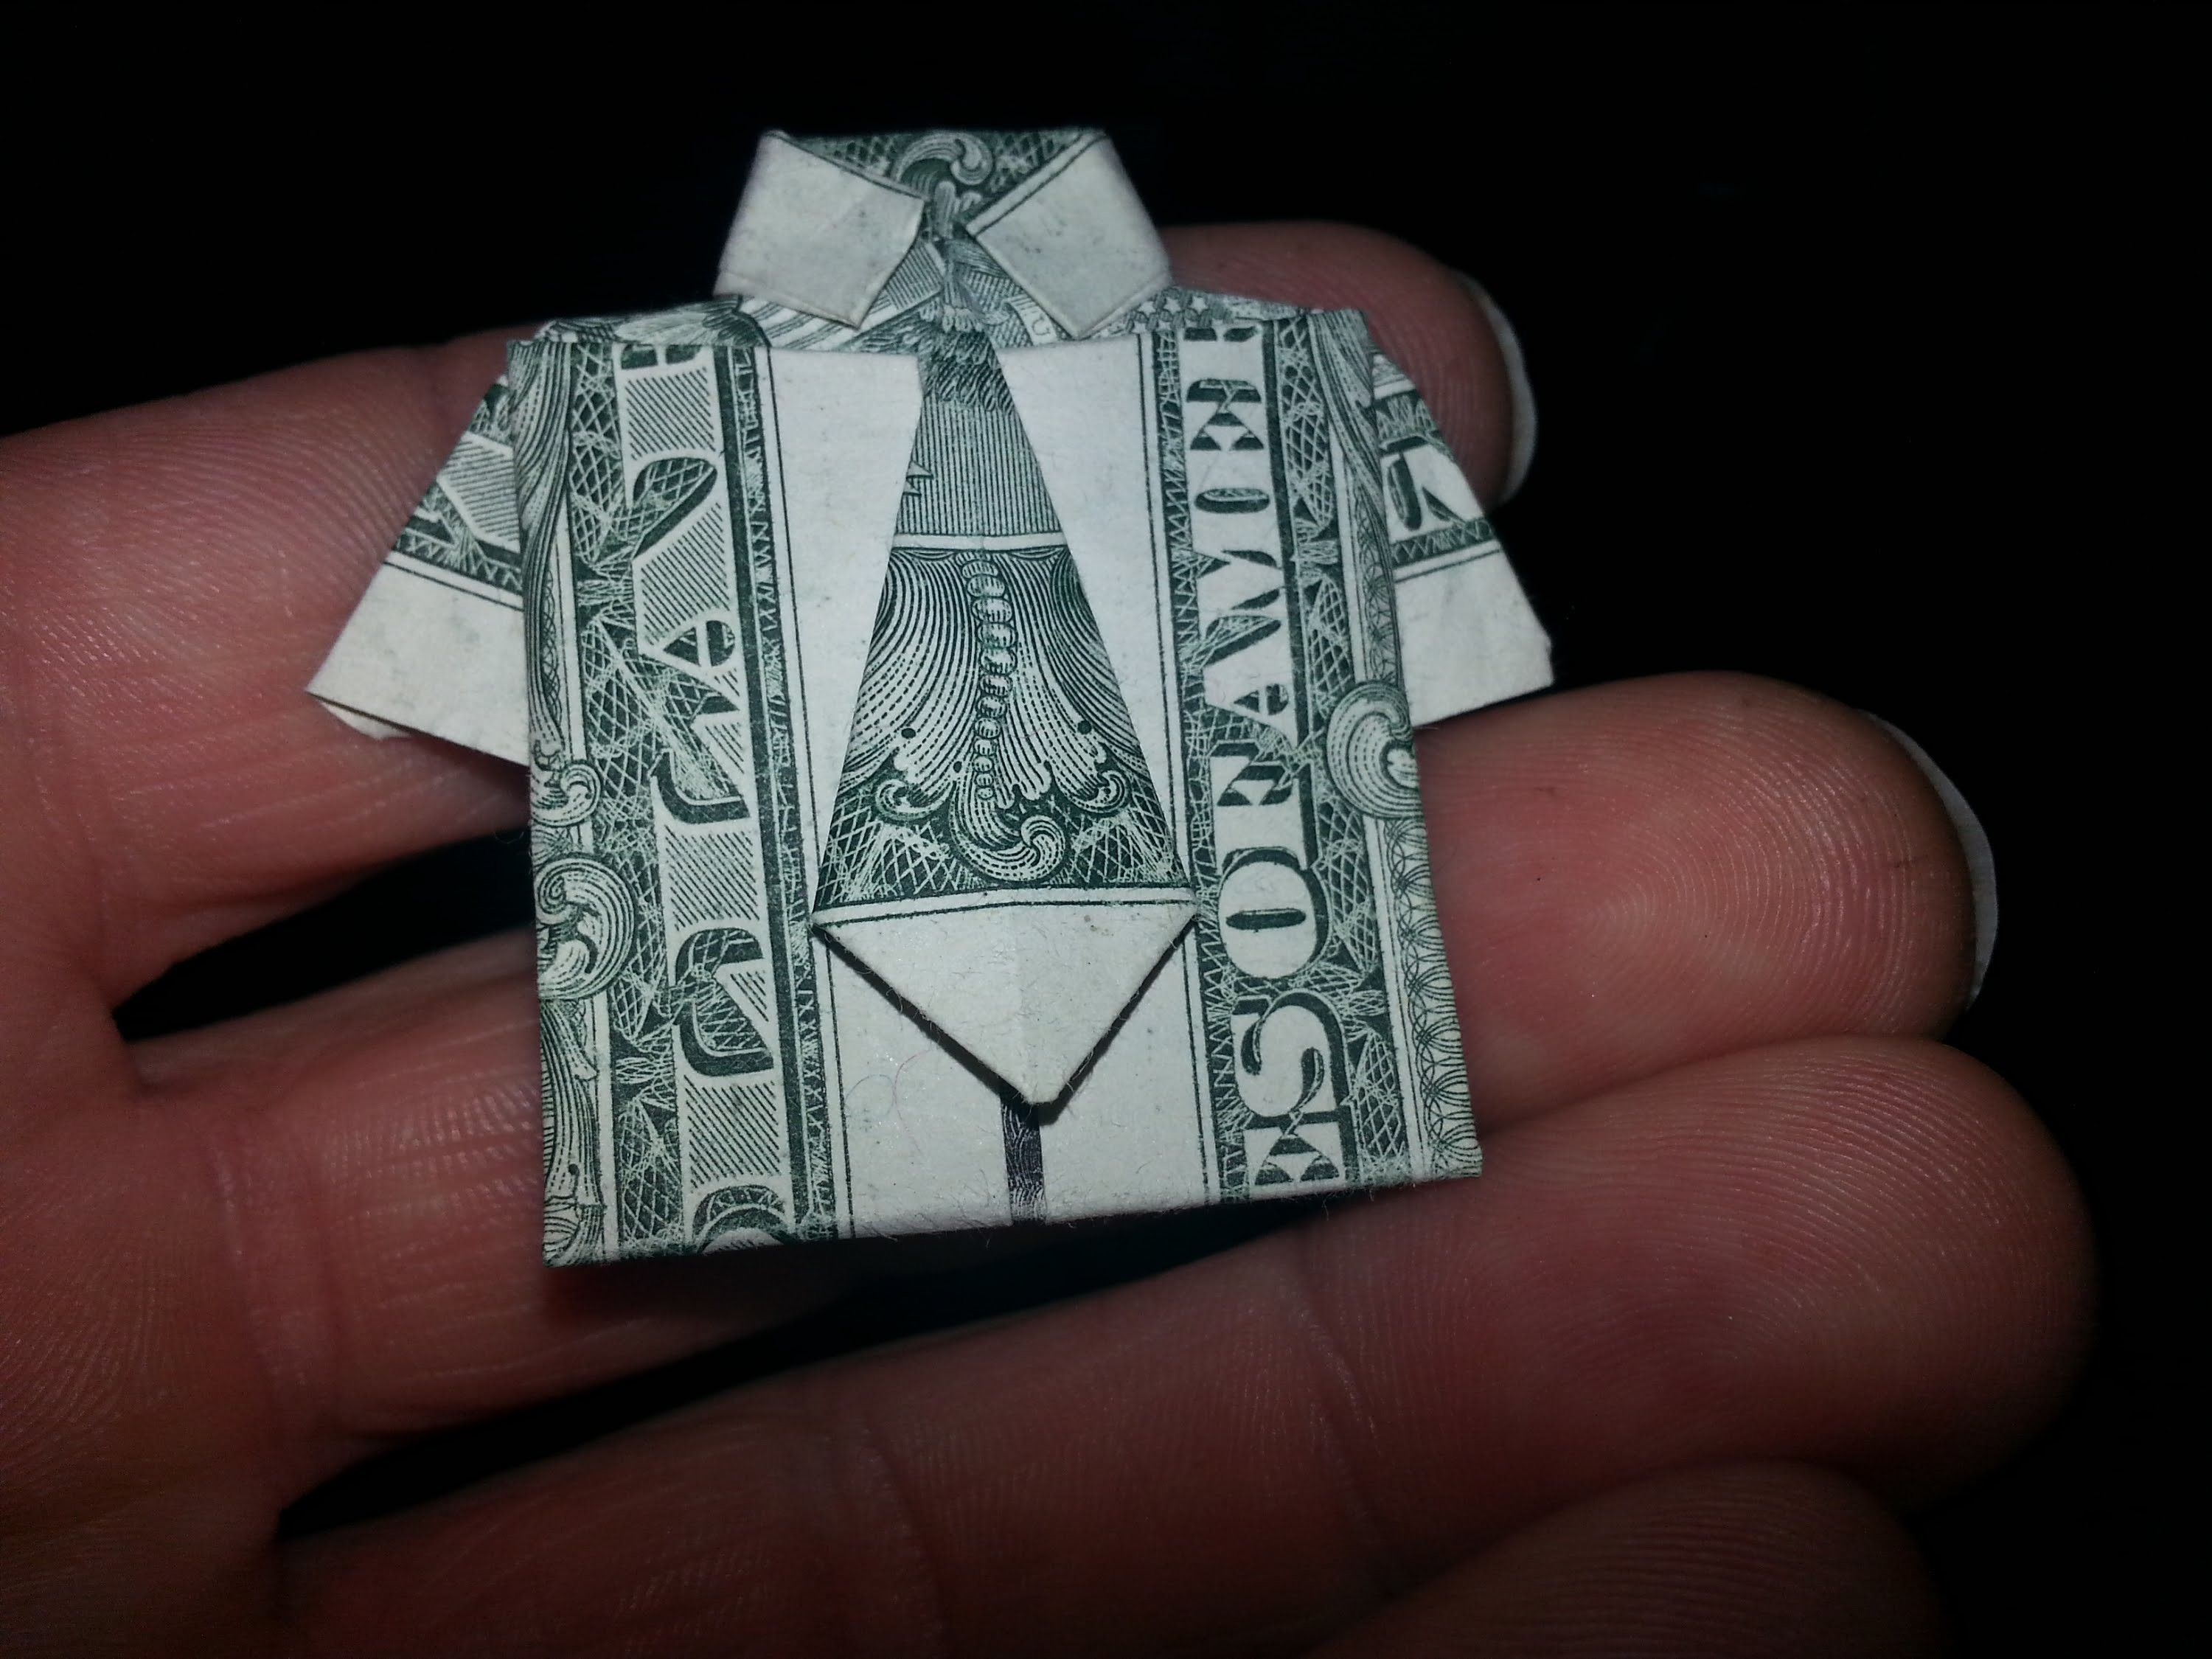 Origami Dollar Bill Shirt With Tie How To Make A Dollar Bill Origami Shirt With Tie Money Transformer